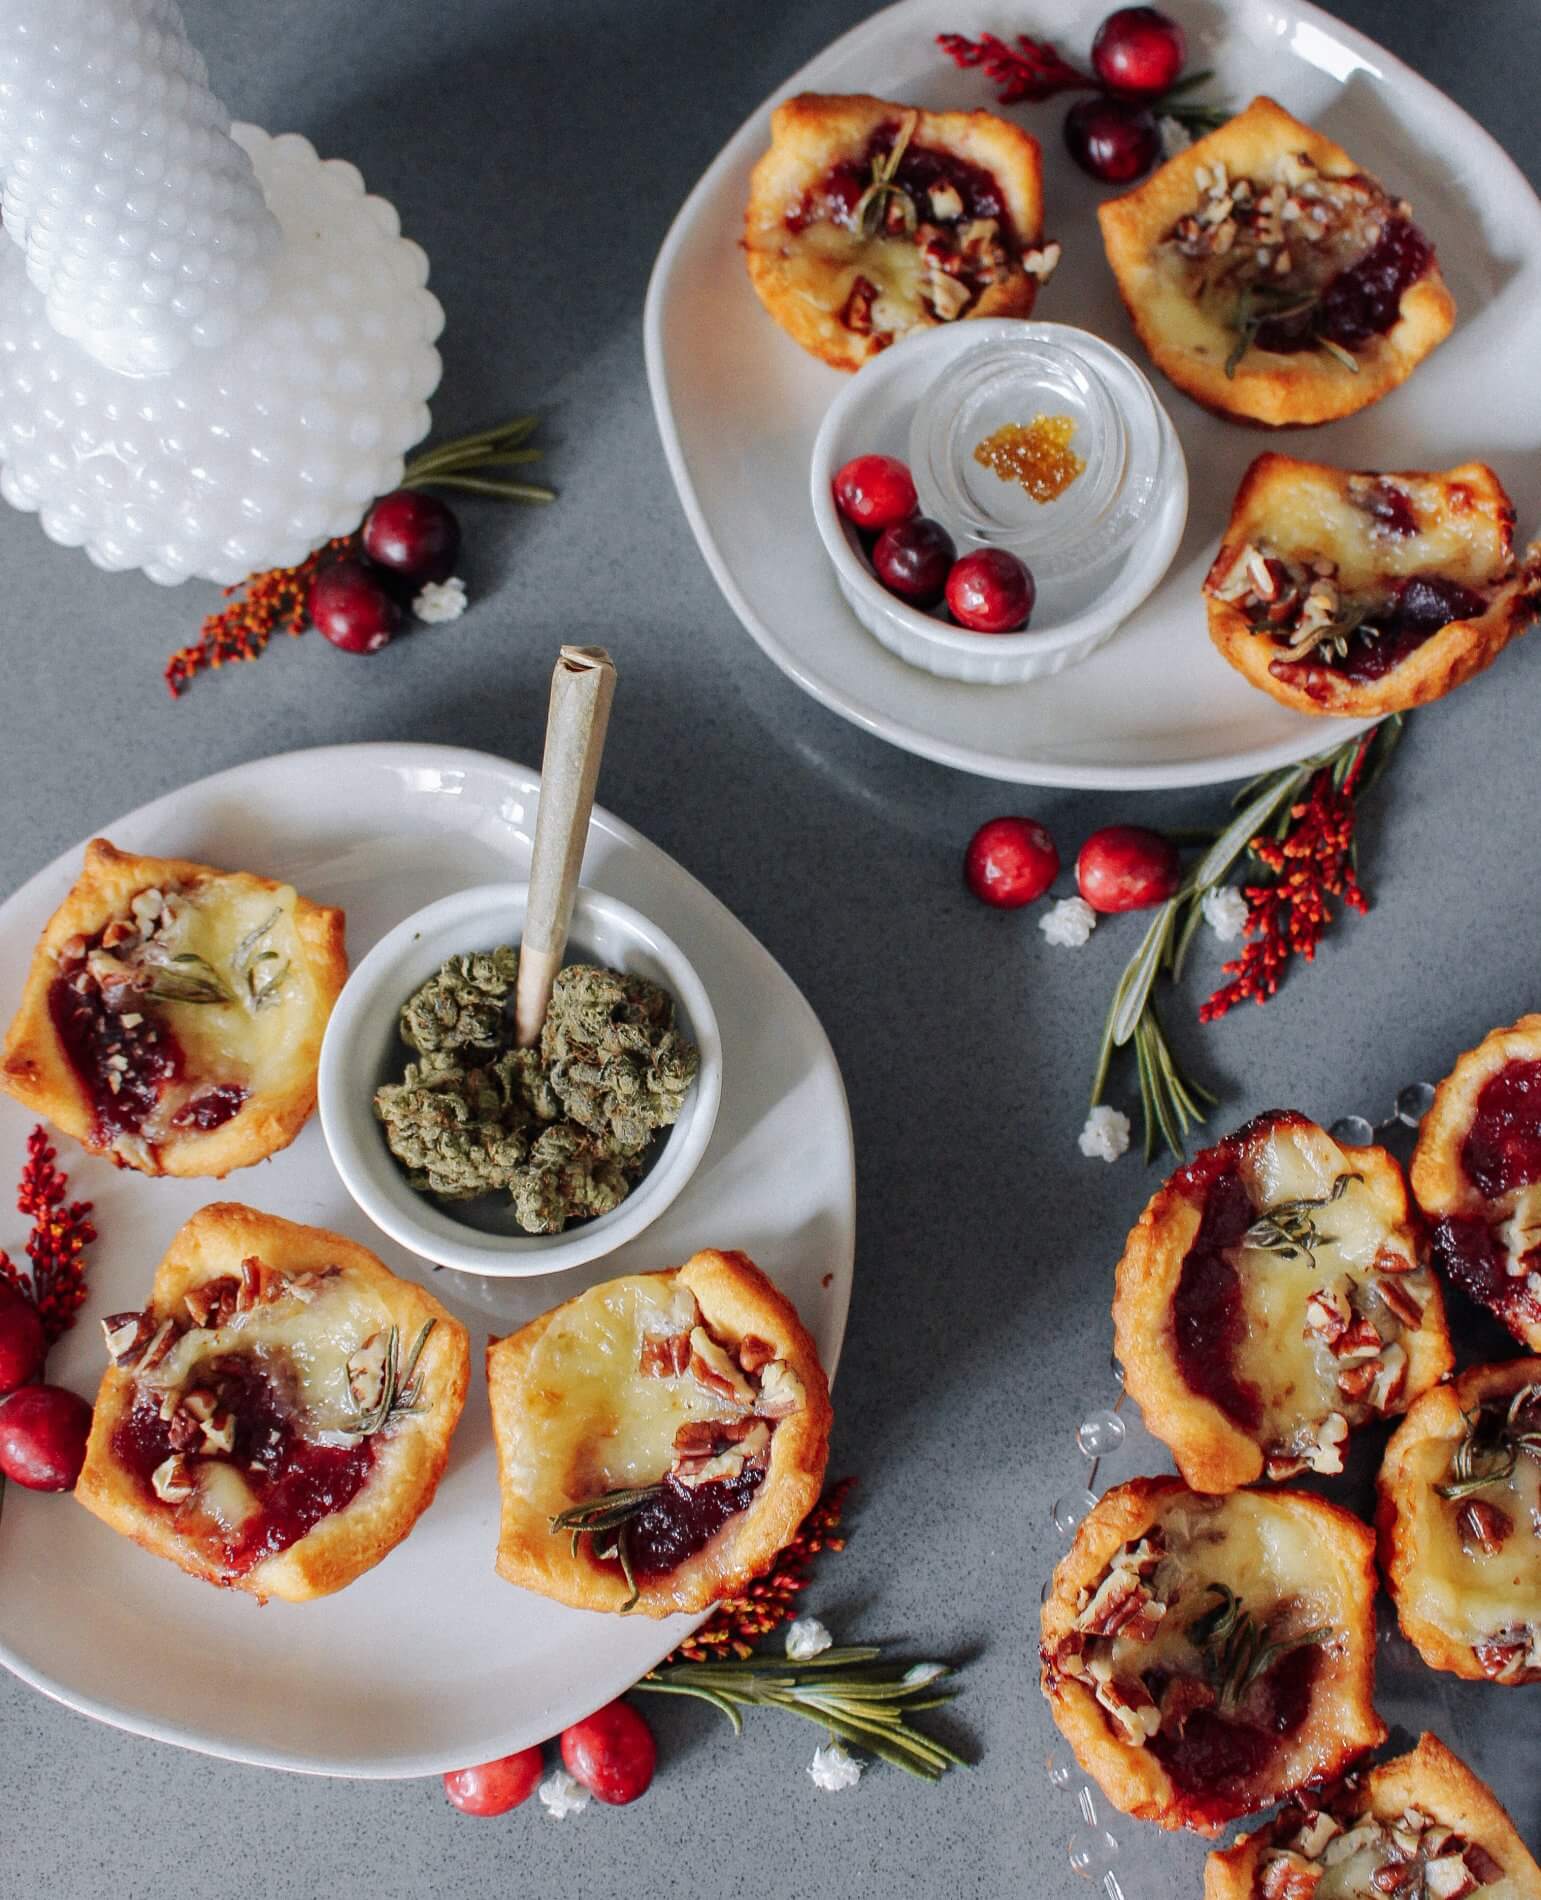 Cranberry Brie Bites paired with Garlic Road flower and concentrate recipe - cannabis thanksgiving recipe